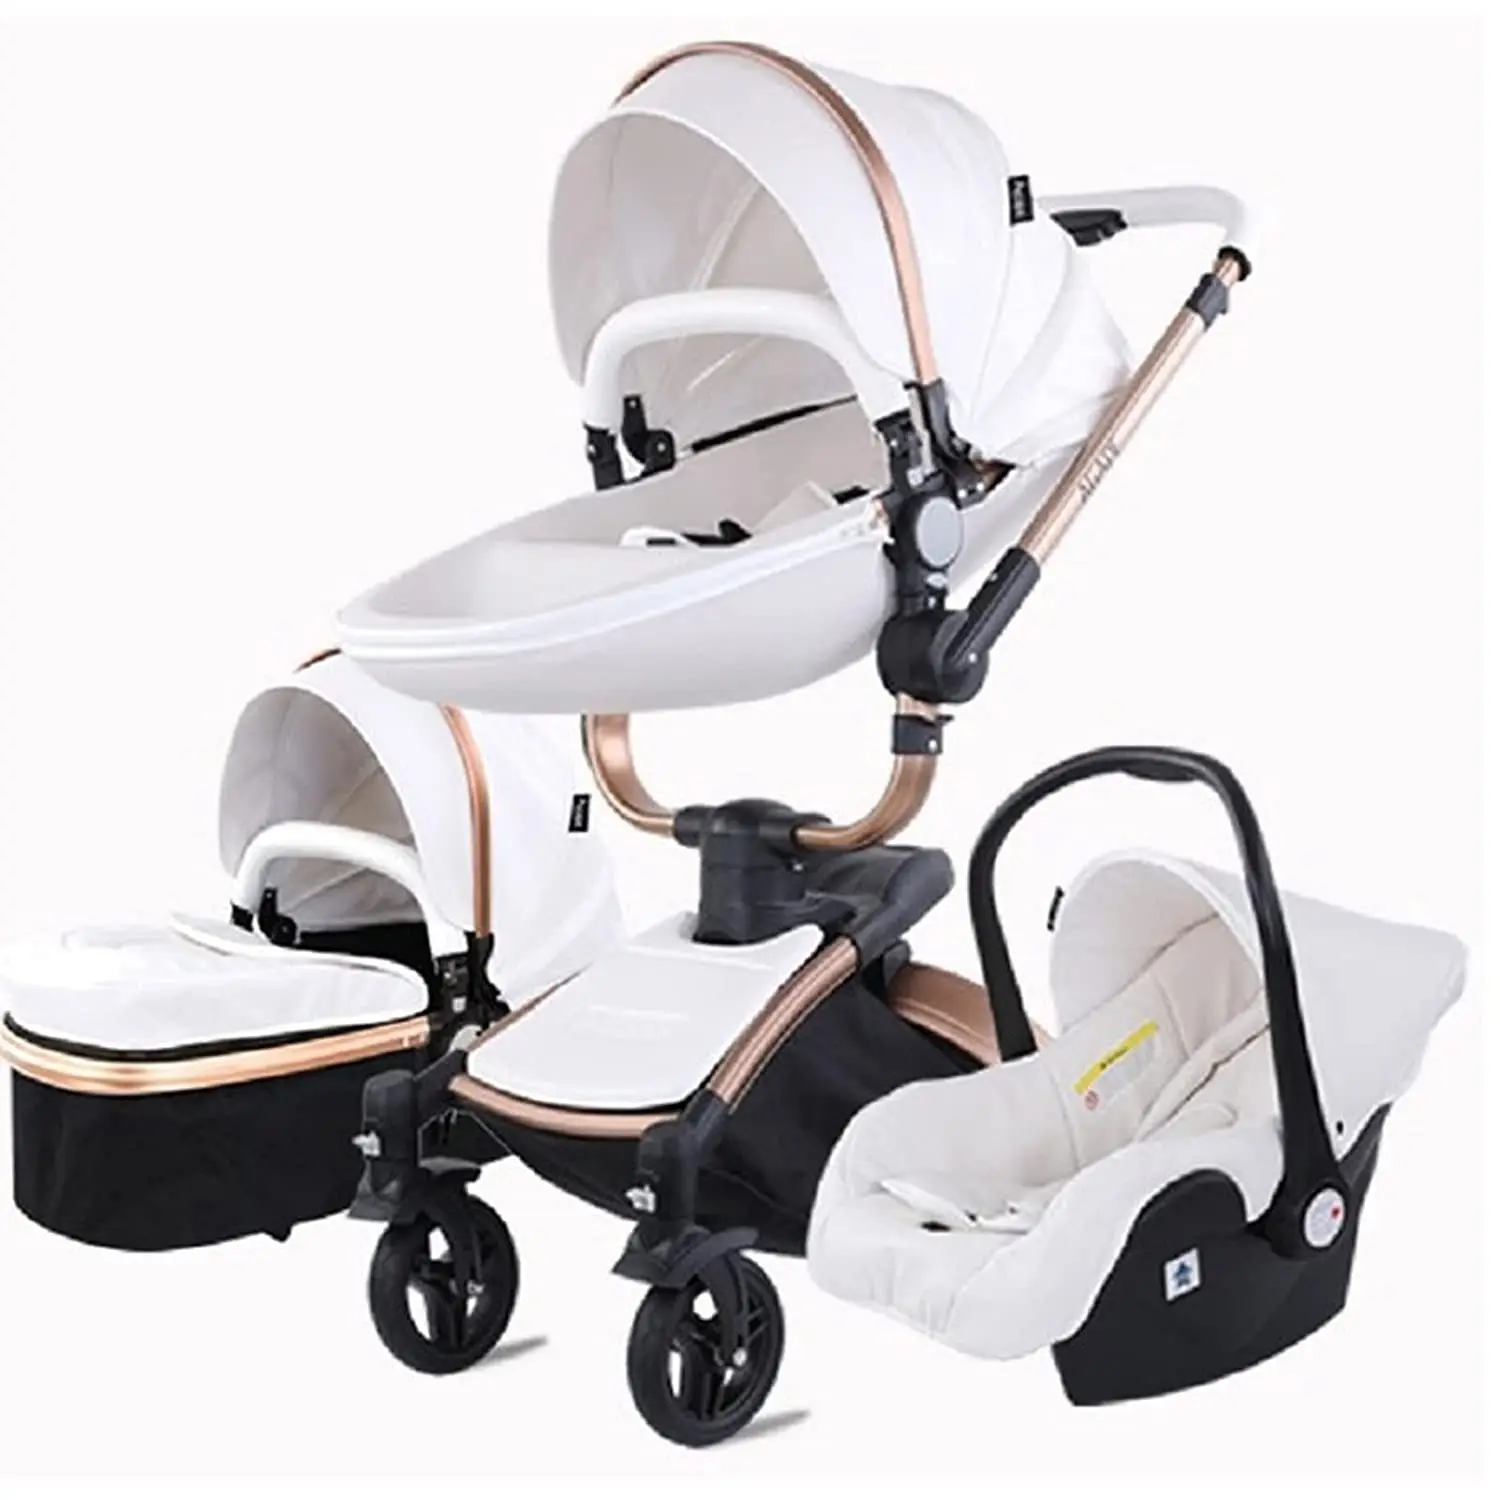 New Design Baby Pram Hot Sales Multi-Functional Carriage High Quality Pushchair Foldable Buggy Baby Stroller